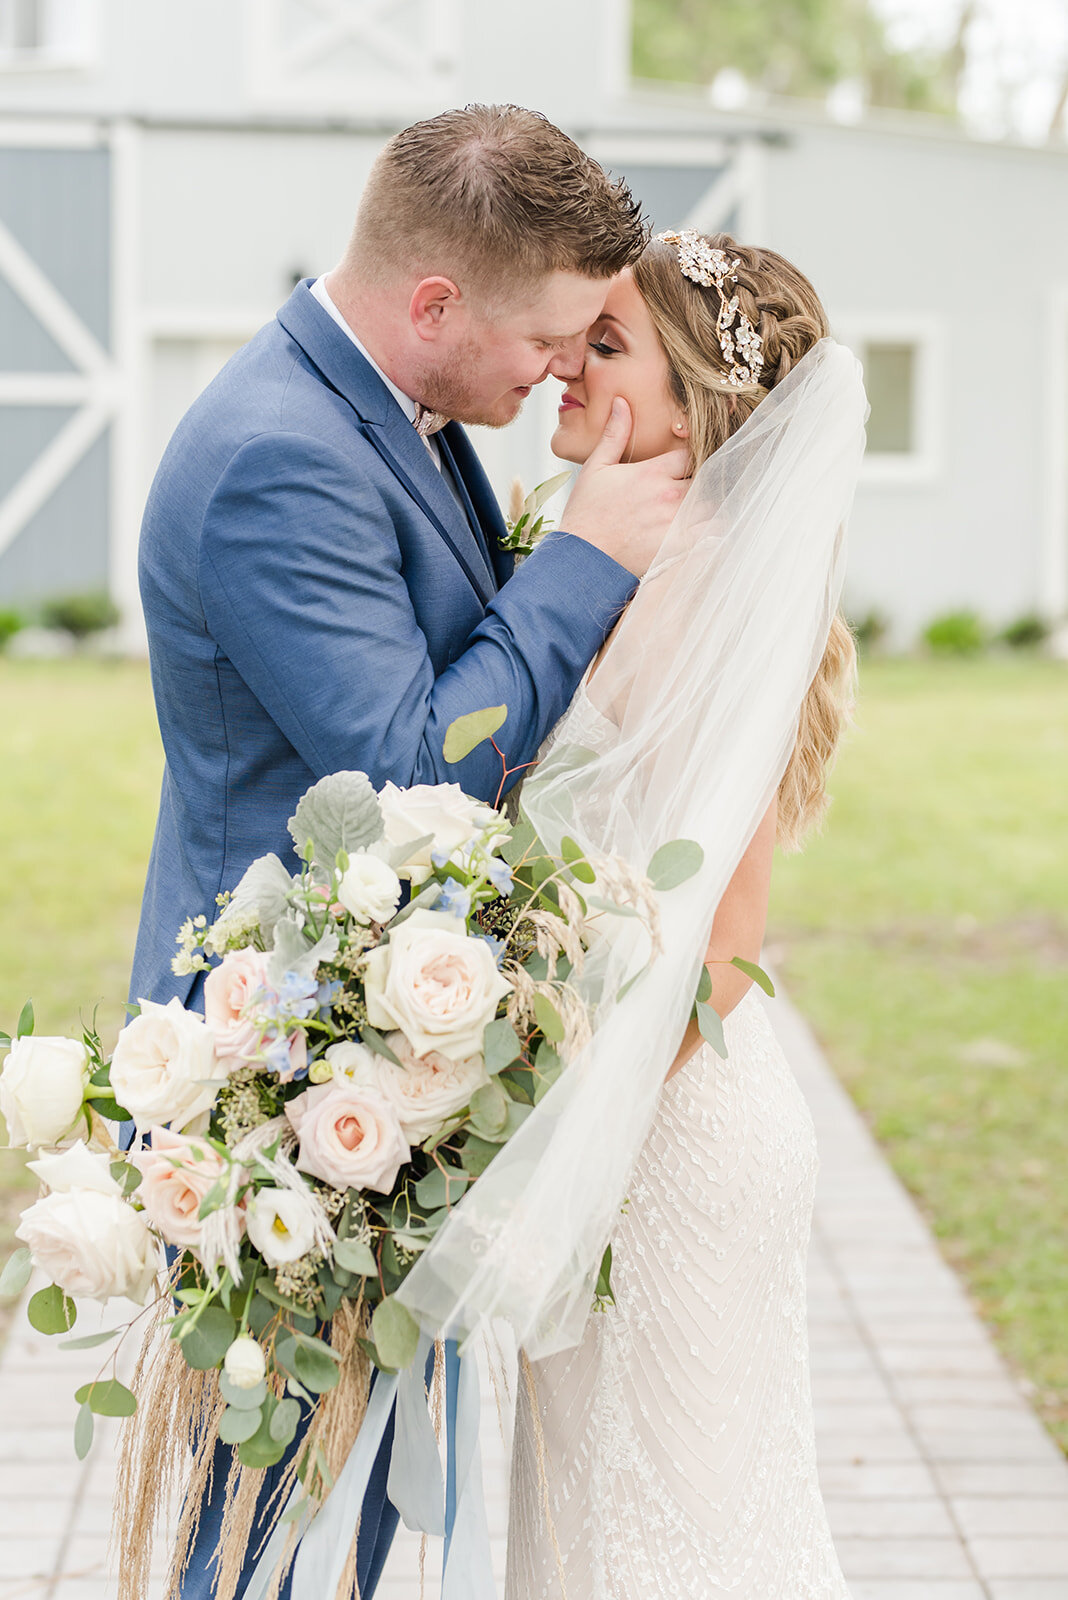 A sweet and beautiful country styled wedding with a barn venue and beautiful white floral bouquet.jpg